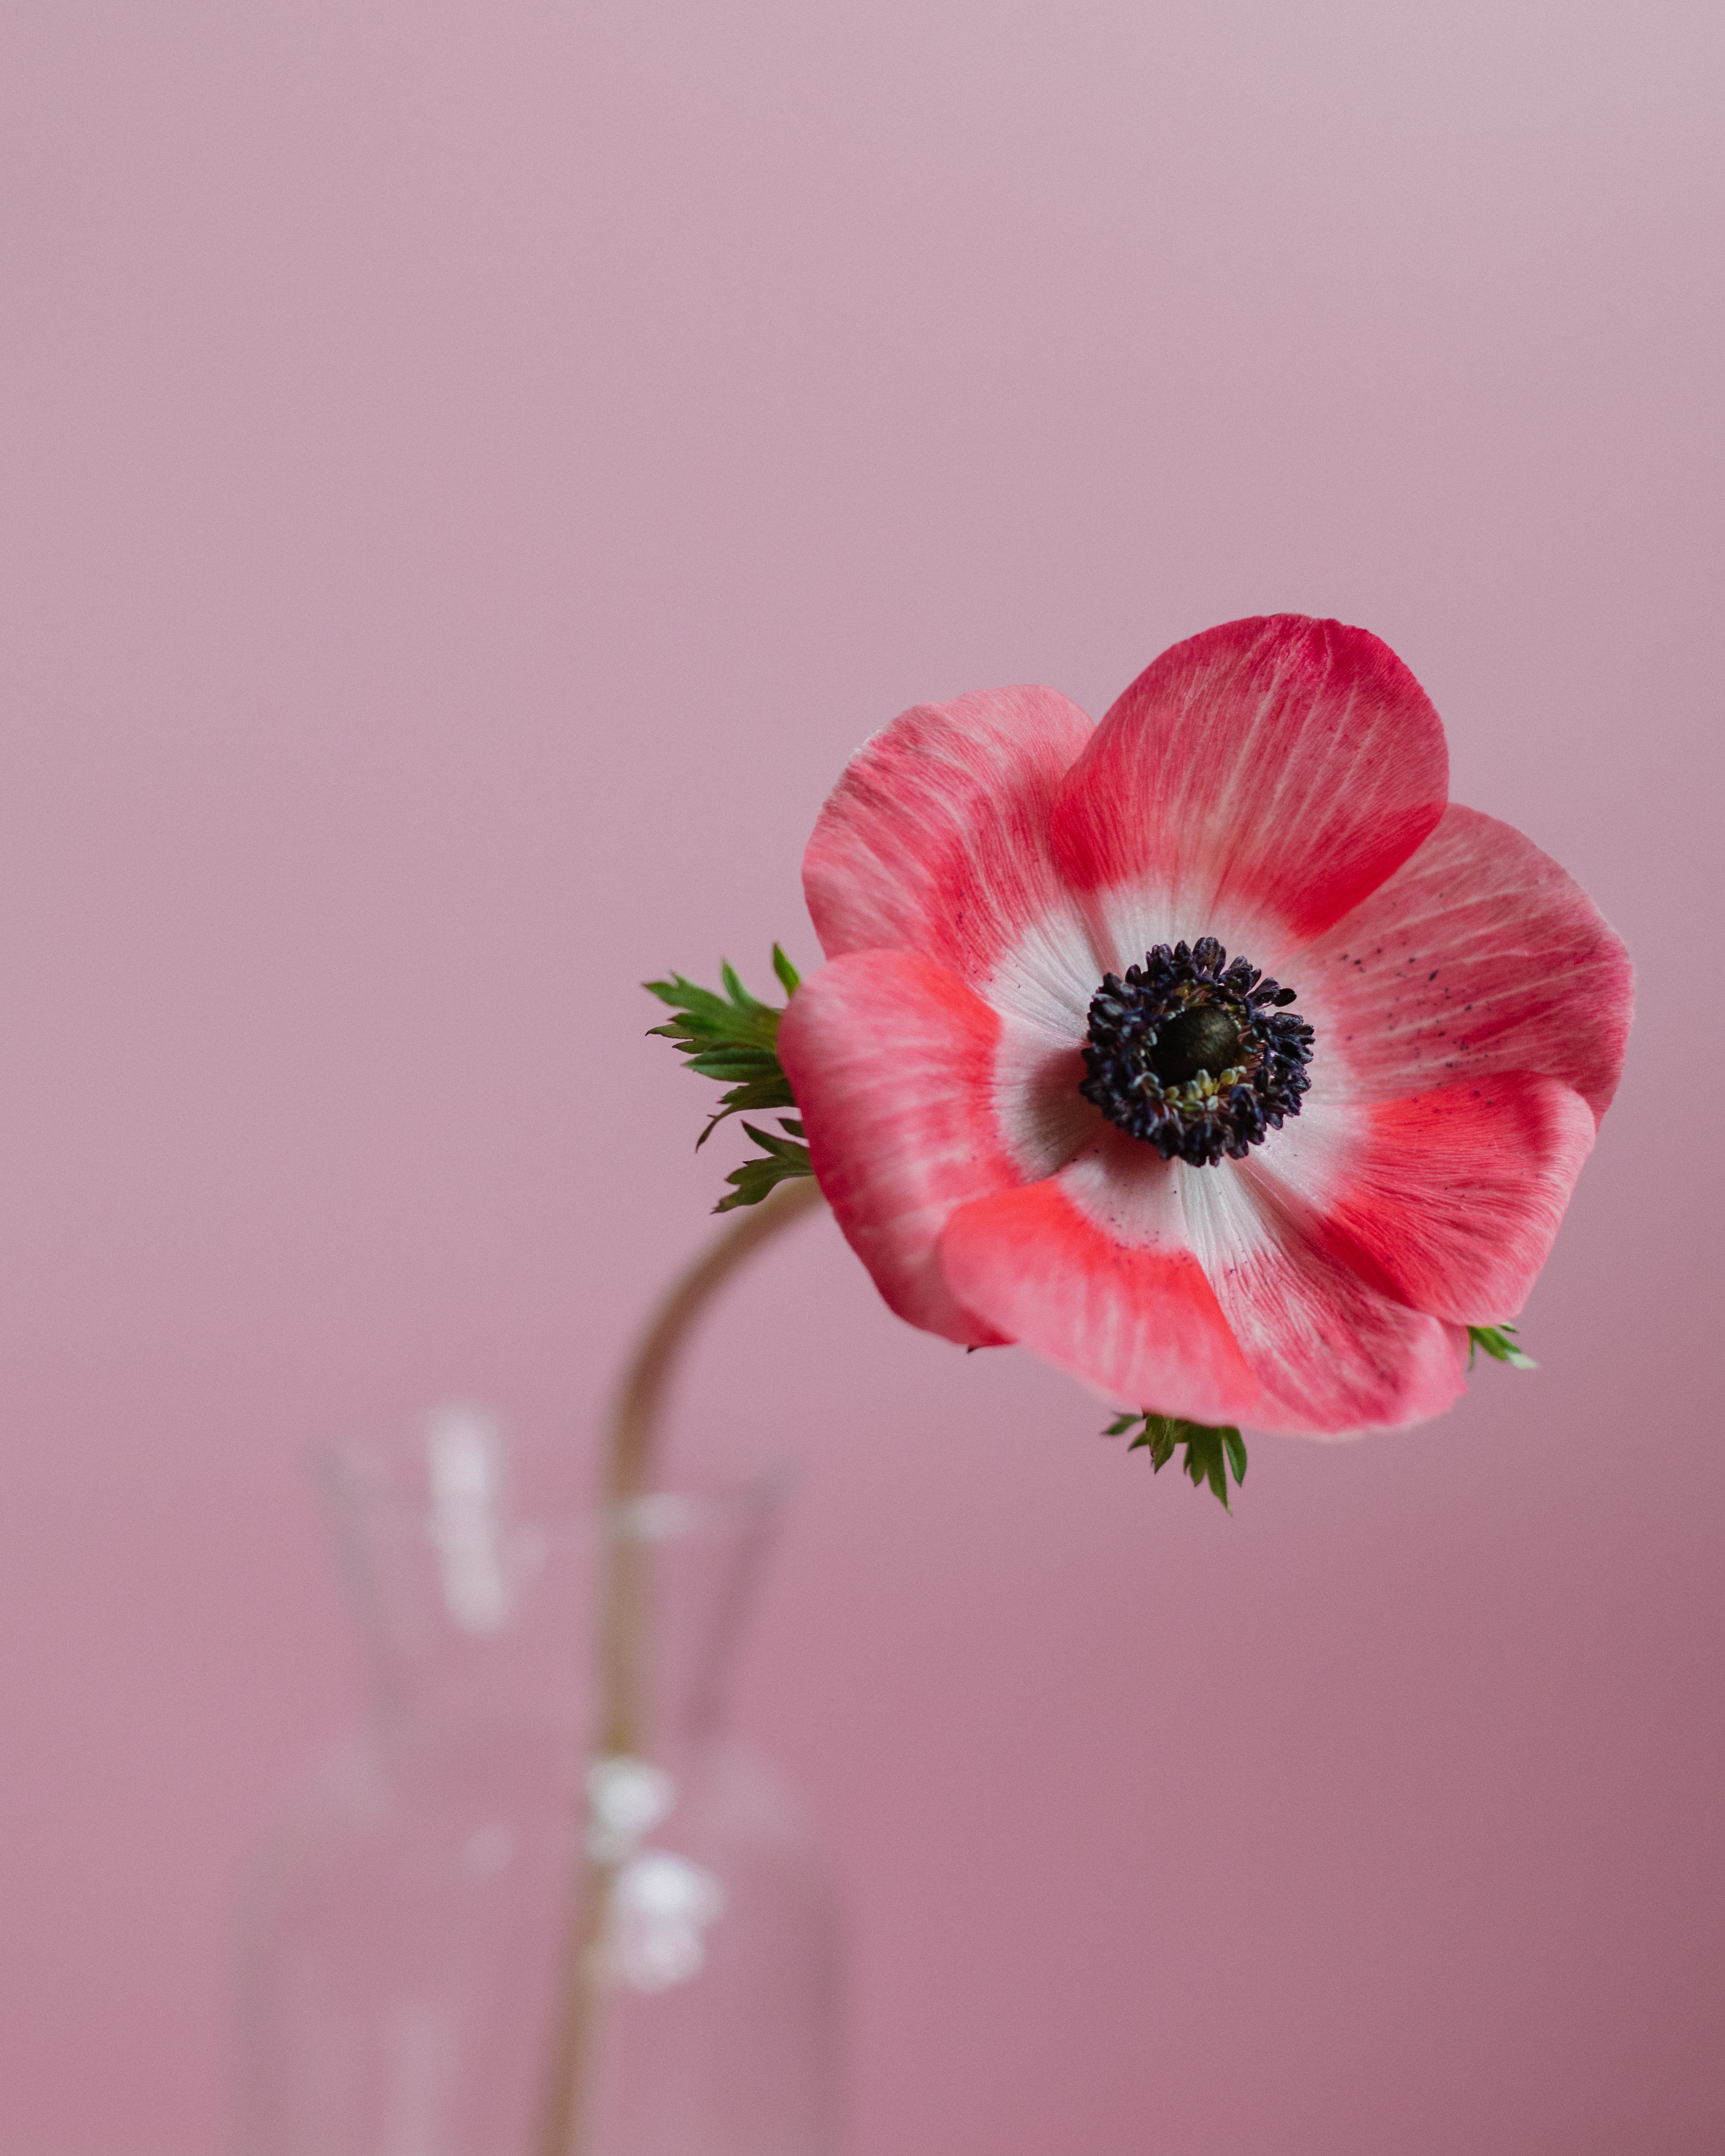 Anemone flower photos download the best free anemone flower stock photos hd images